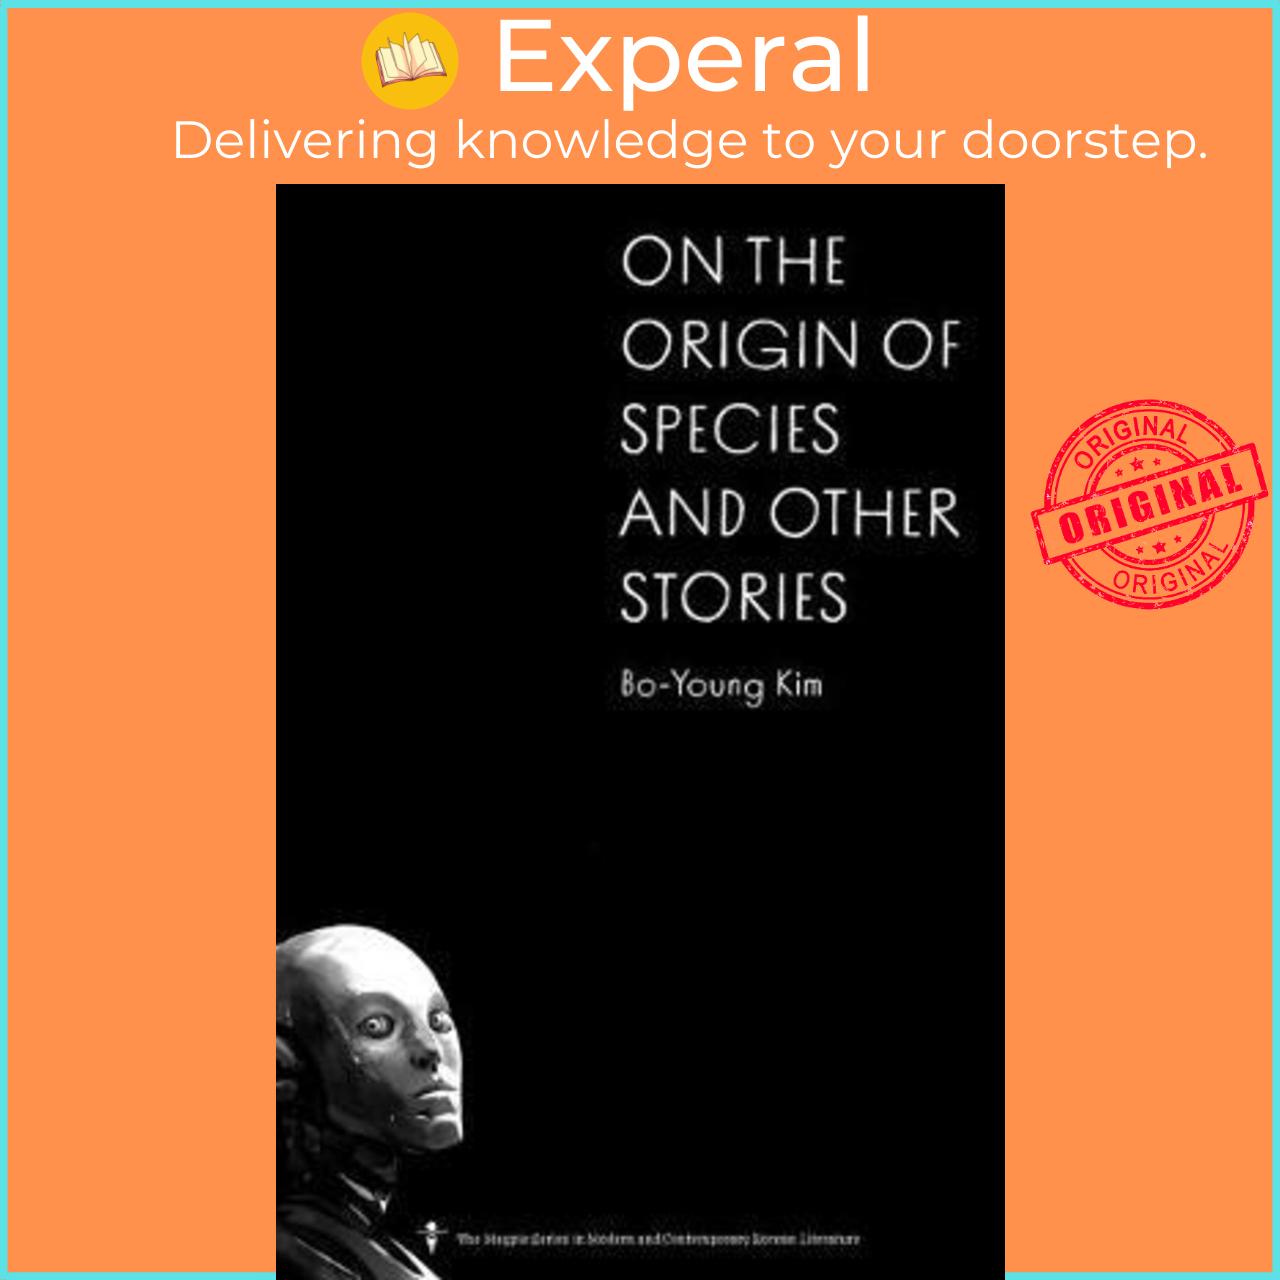 Sách - On the Origin of Species and Other Stories by Bo-Young Kim (paperback)